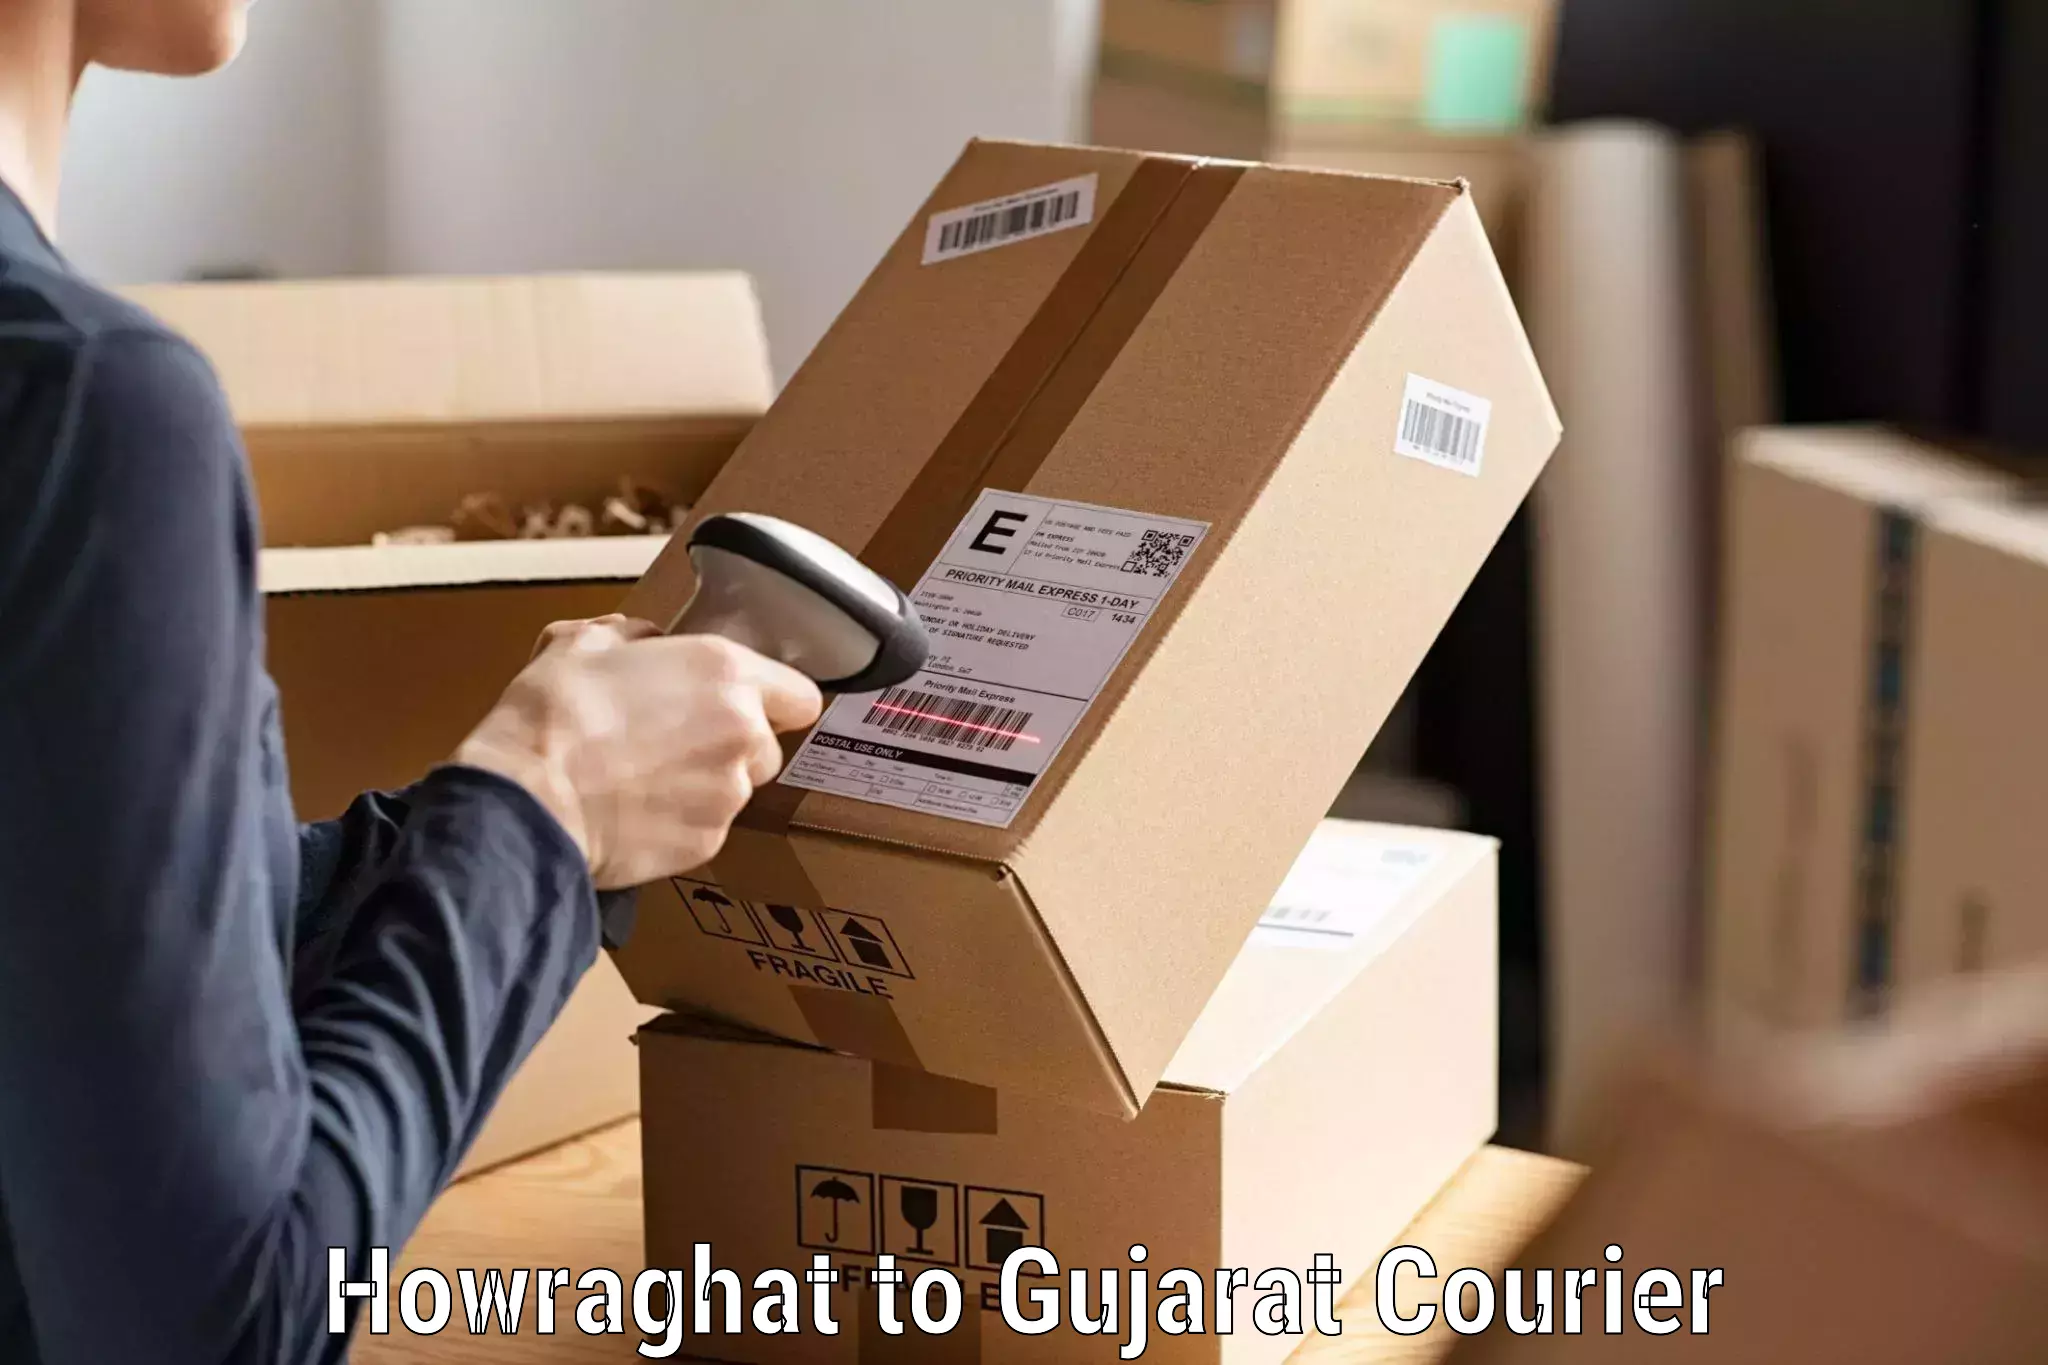 Courier service efficiency Howraghat to Nakhatrana